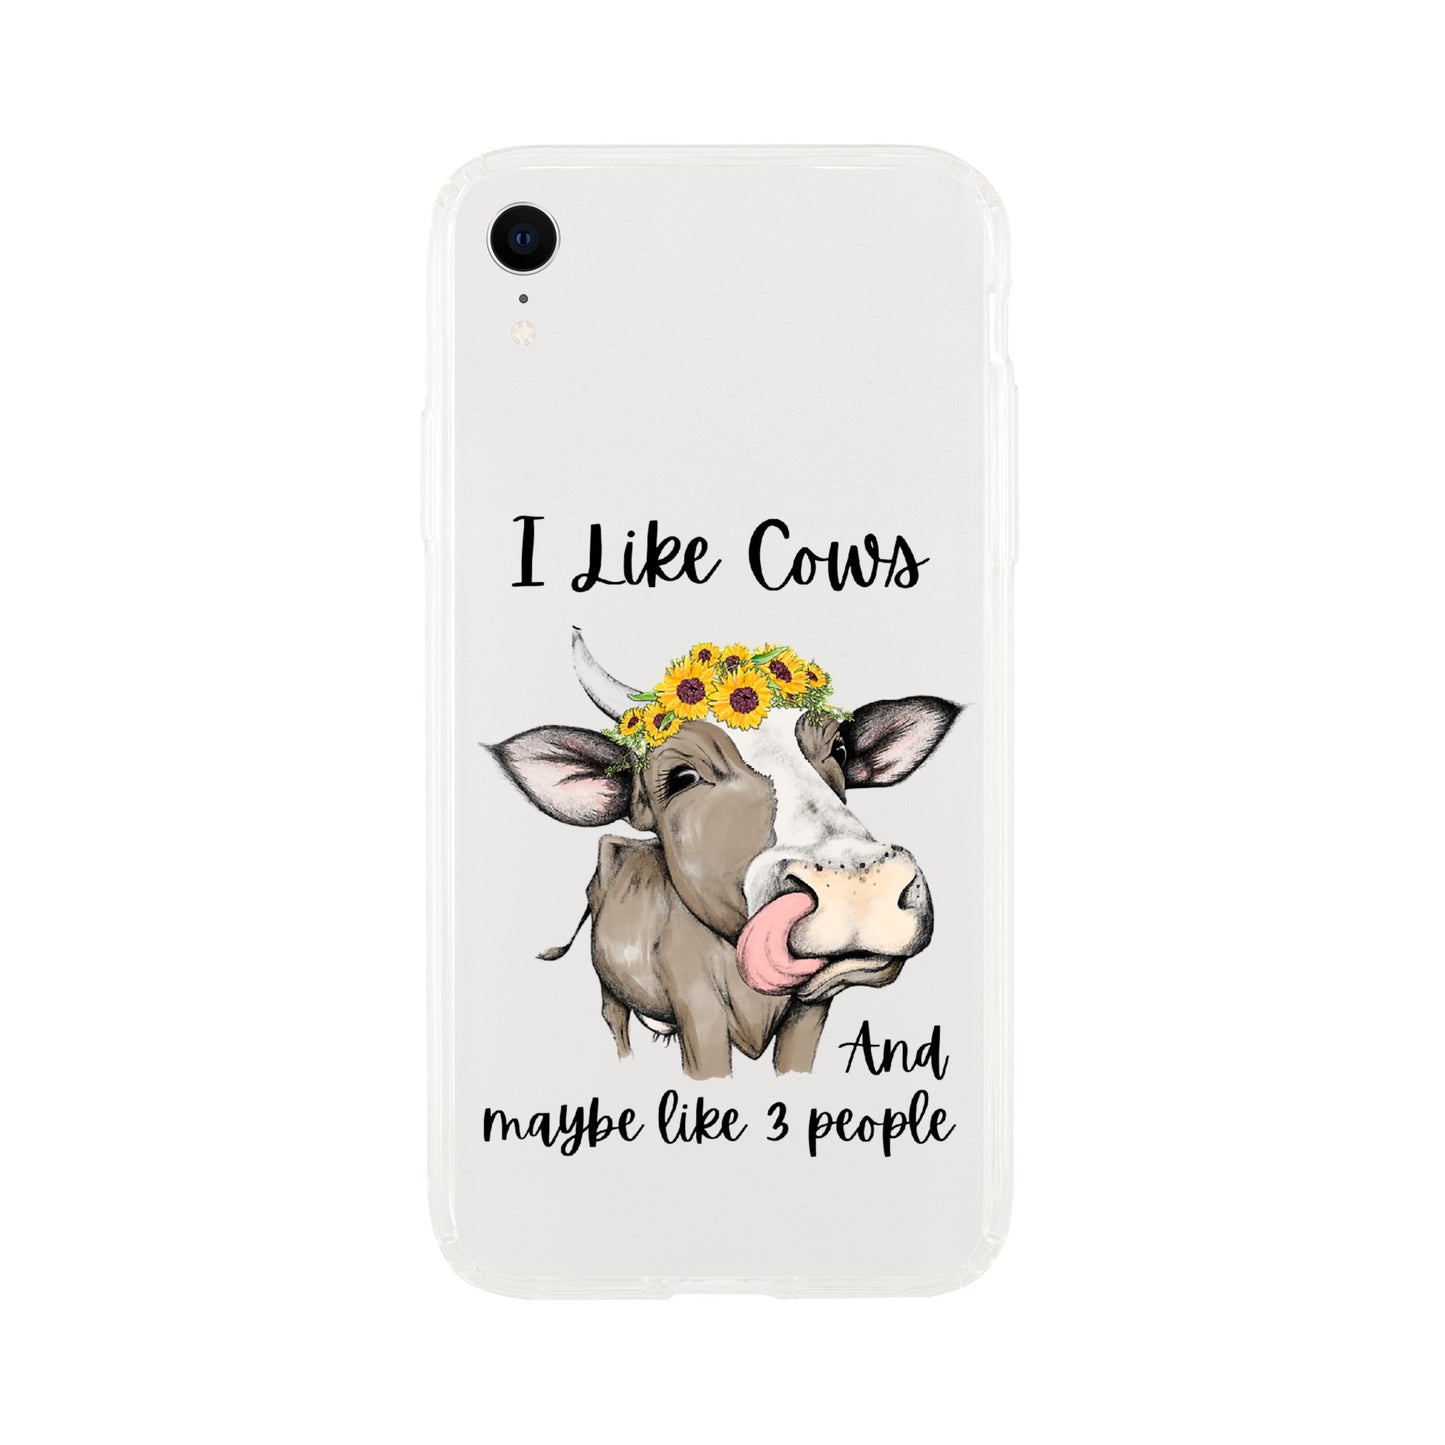 I Like Cows - Clear case